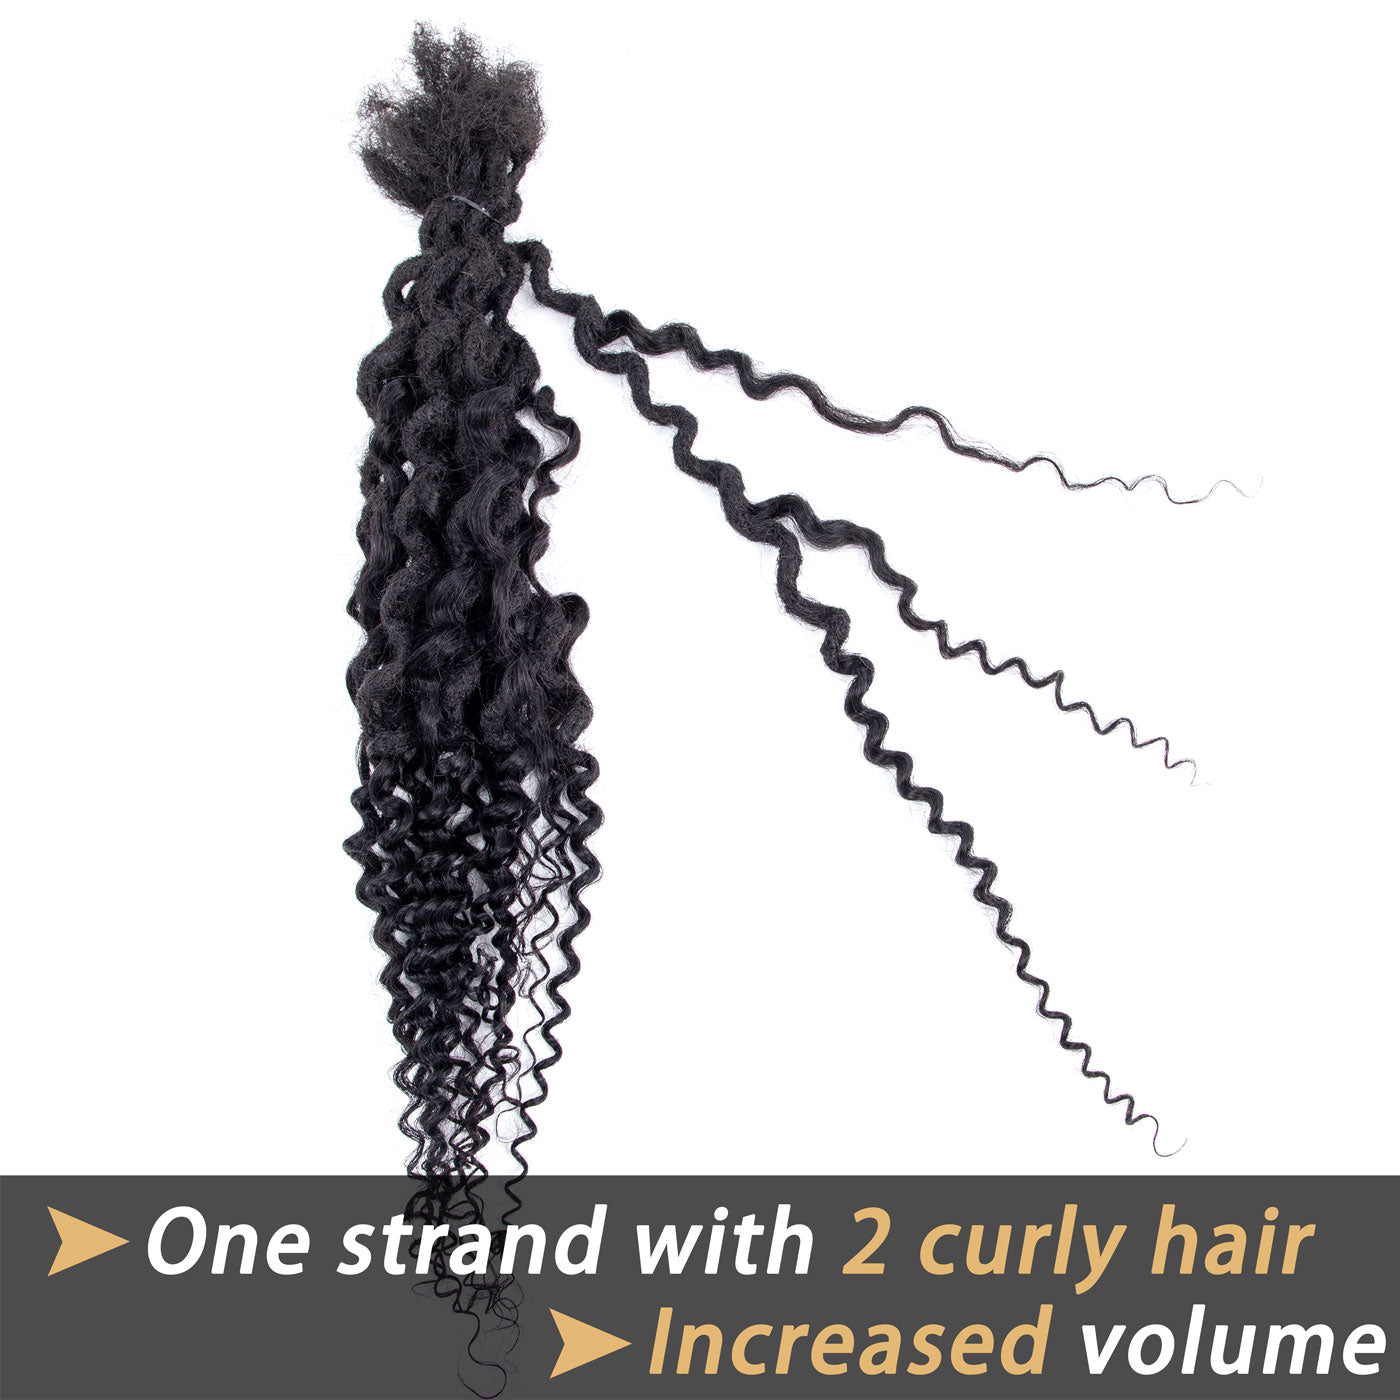 Boho Dreadlocks Extensions with Curly Ends Afro Human Hair Handmade Doddess Lcos 0.6cm Thickness